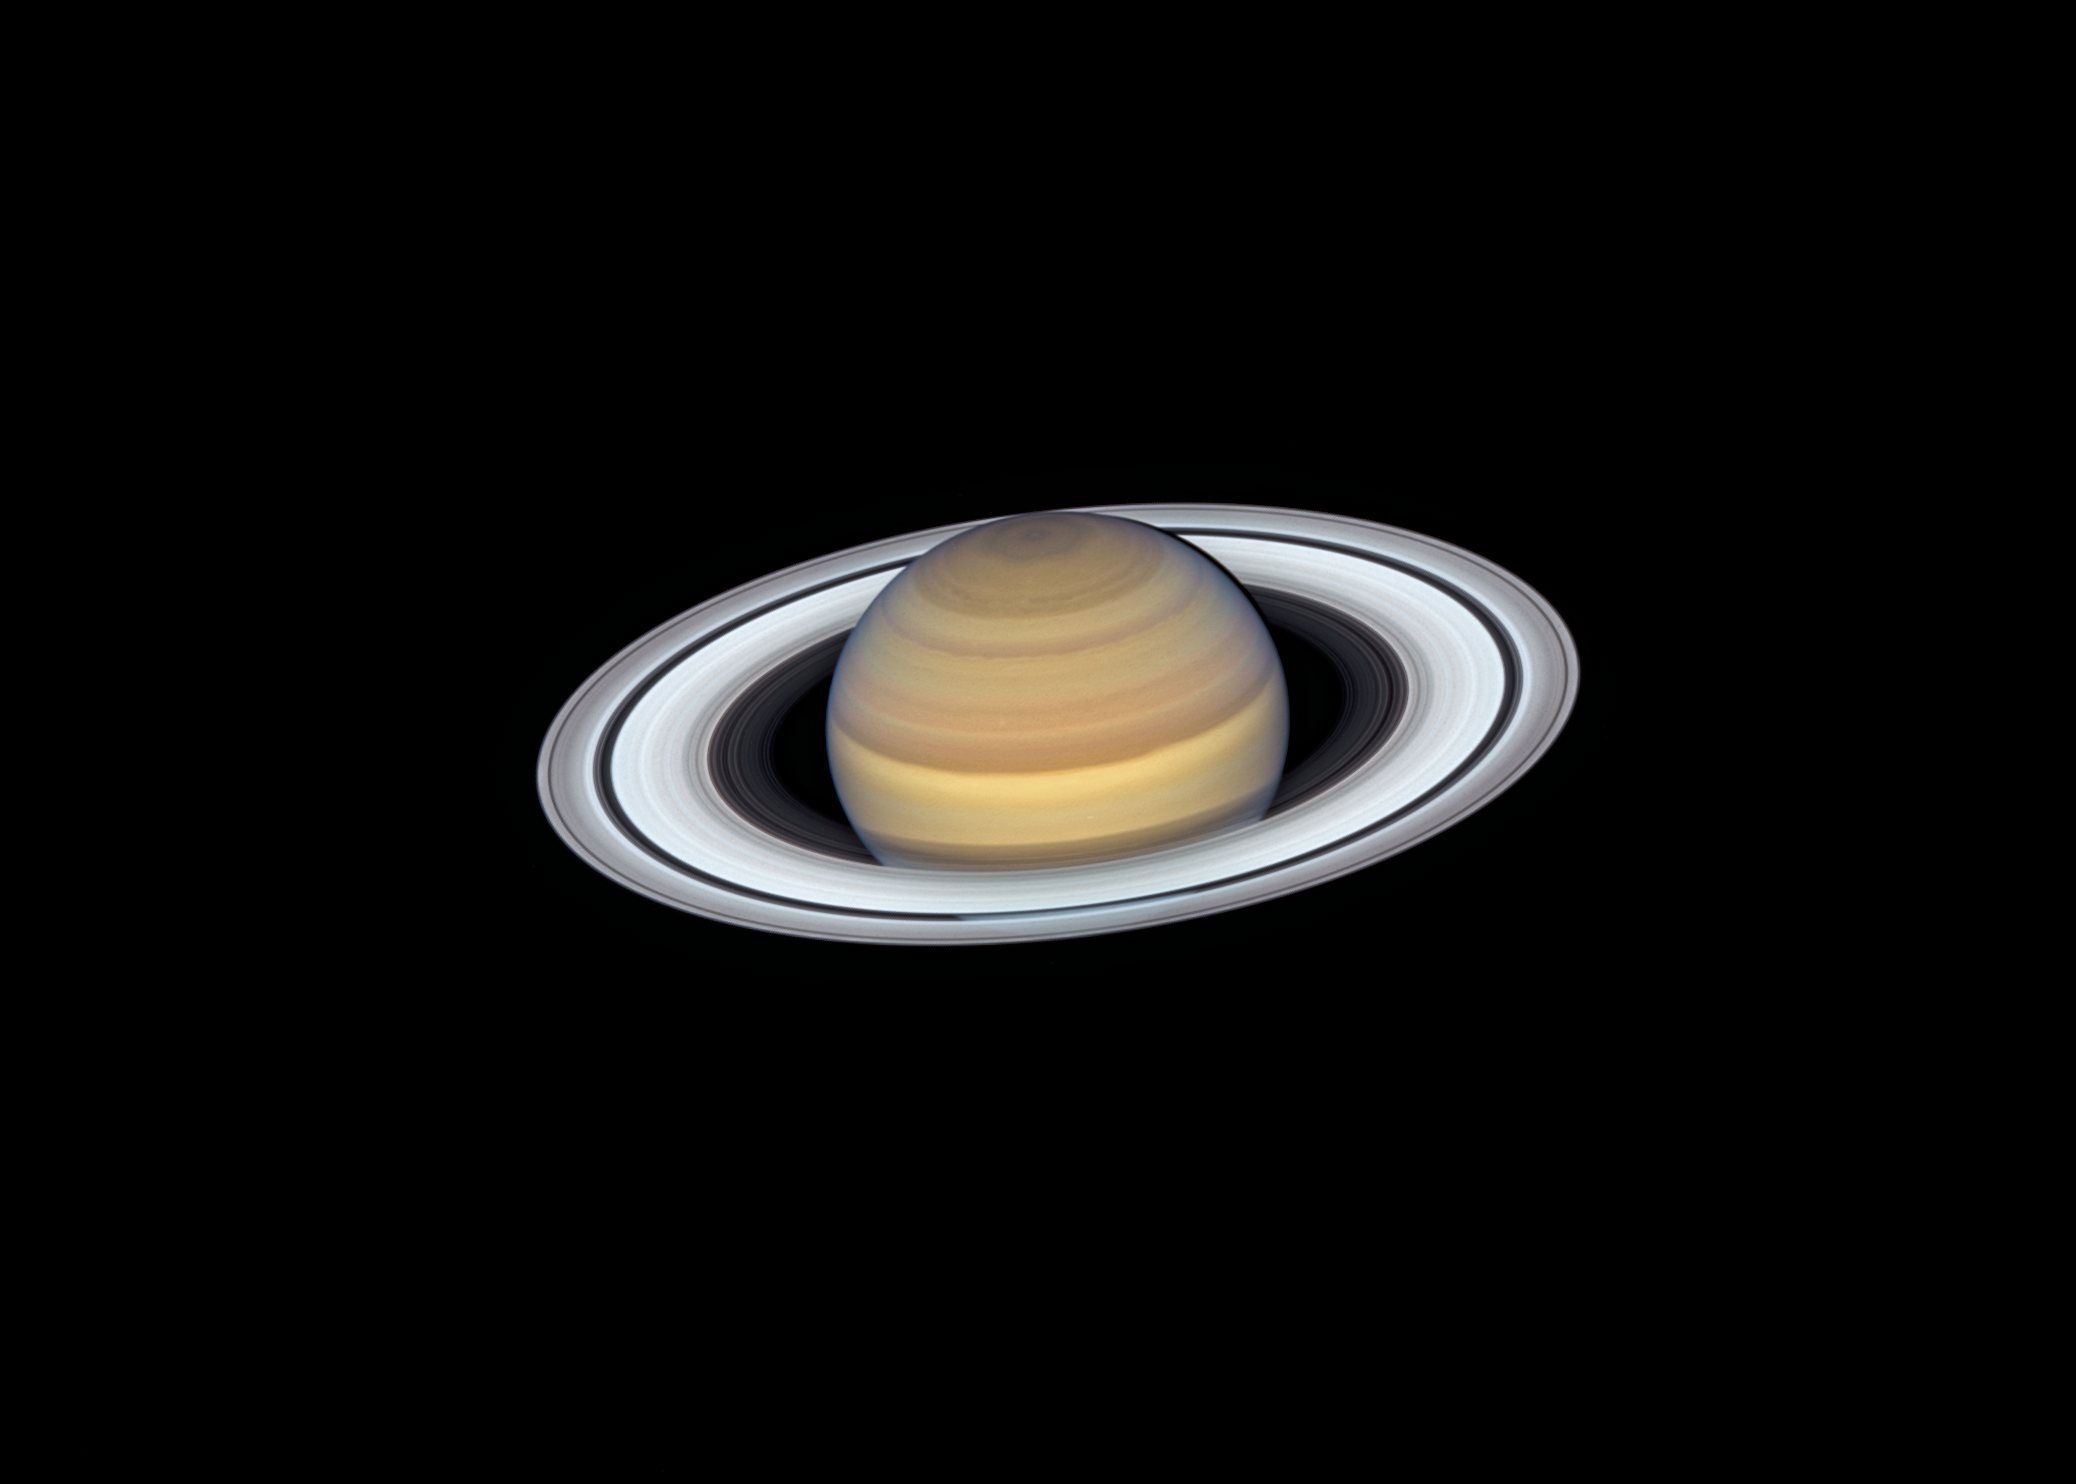 Saturn and its glowing rings in stark contrast against the blackness of space